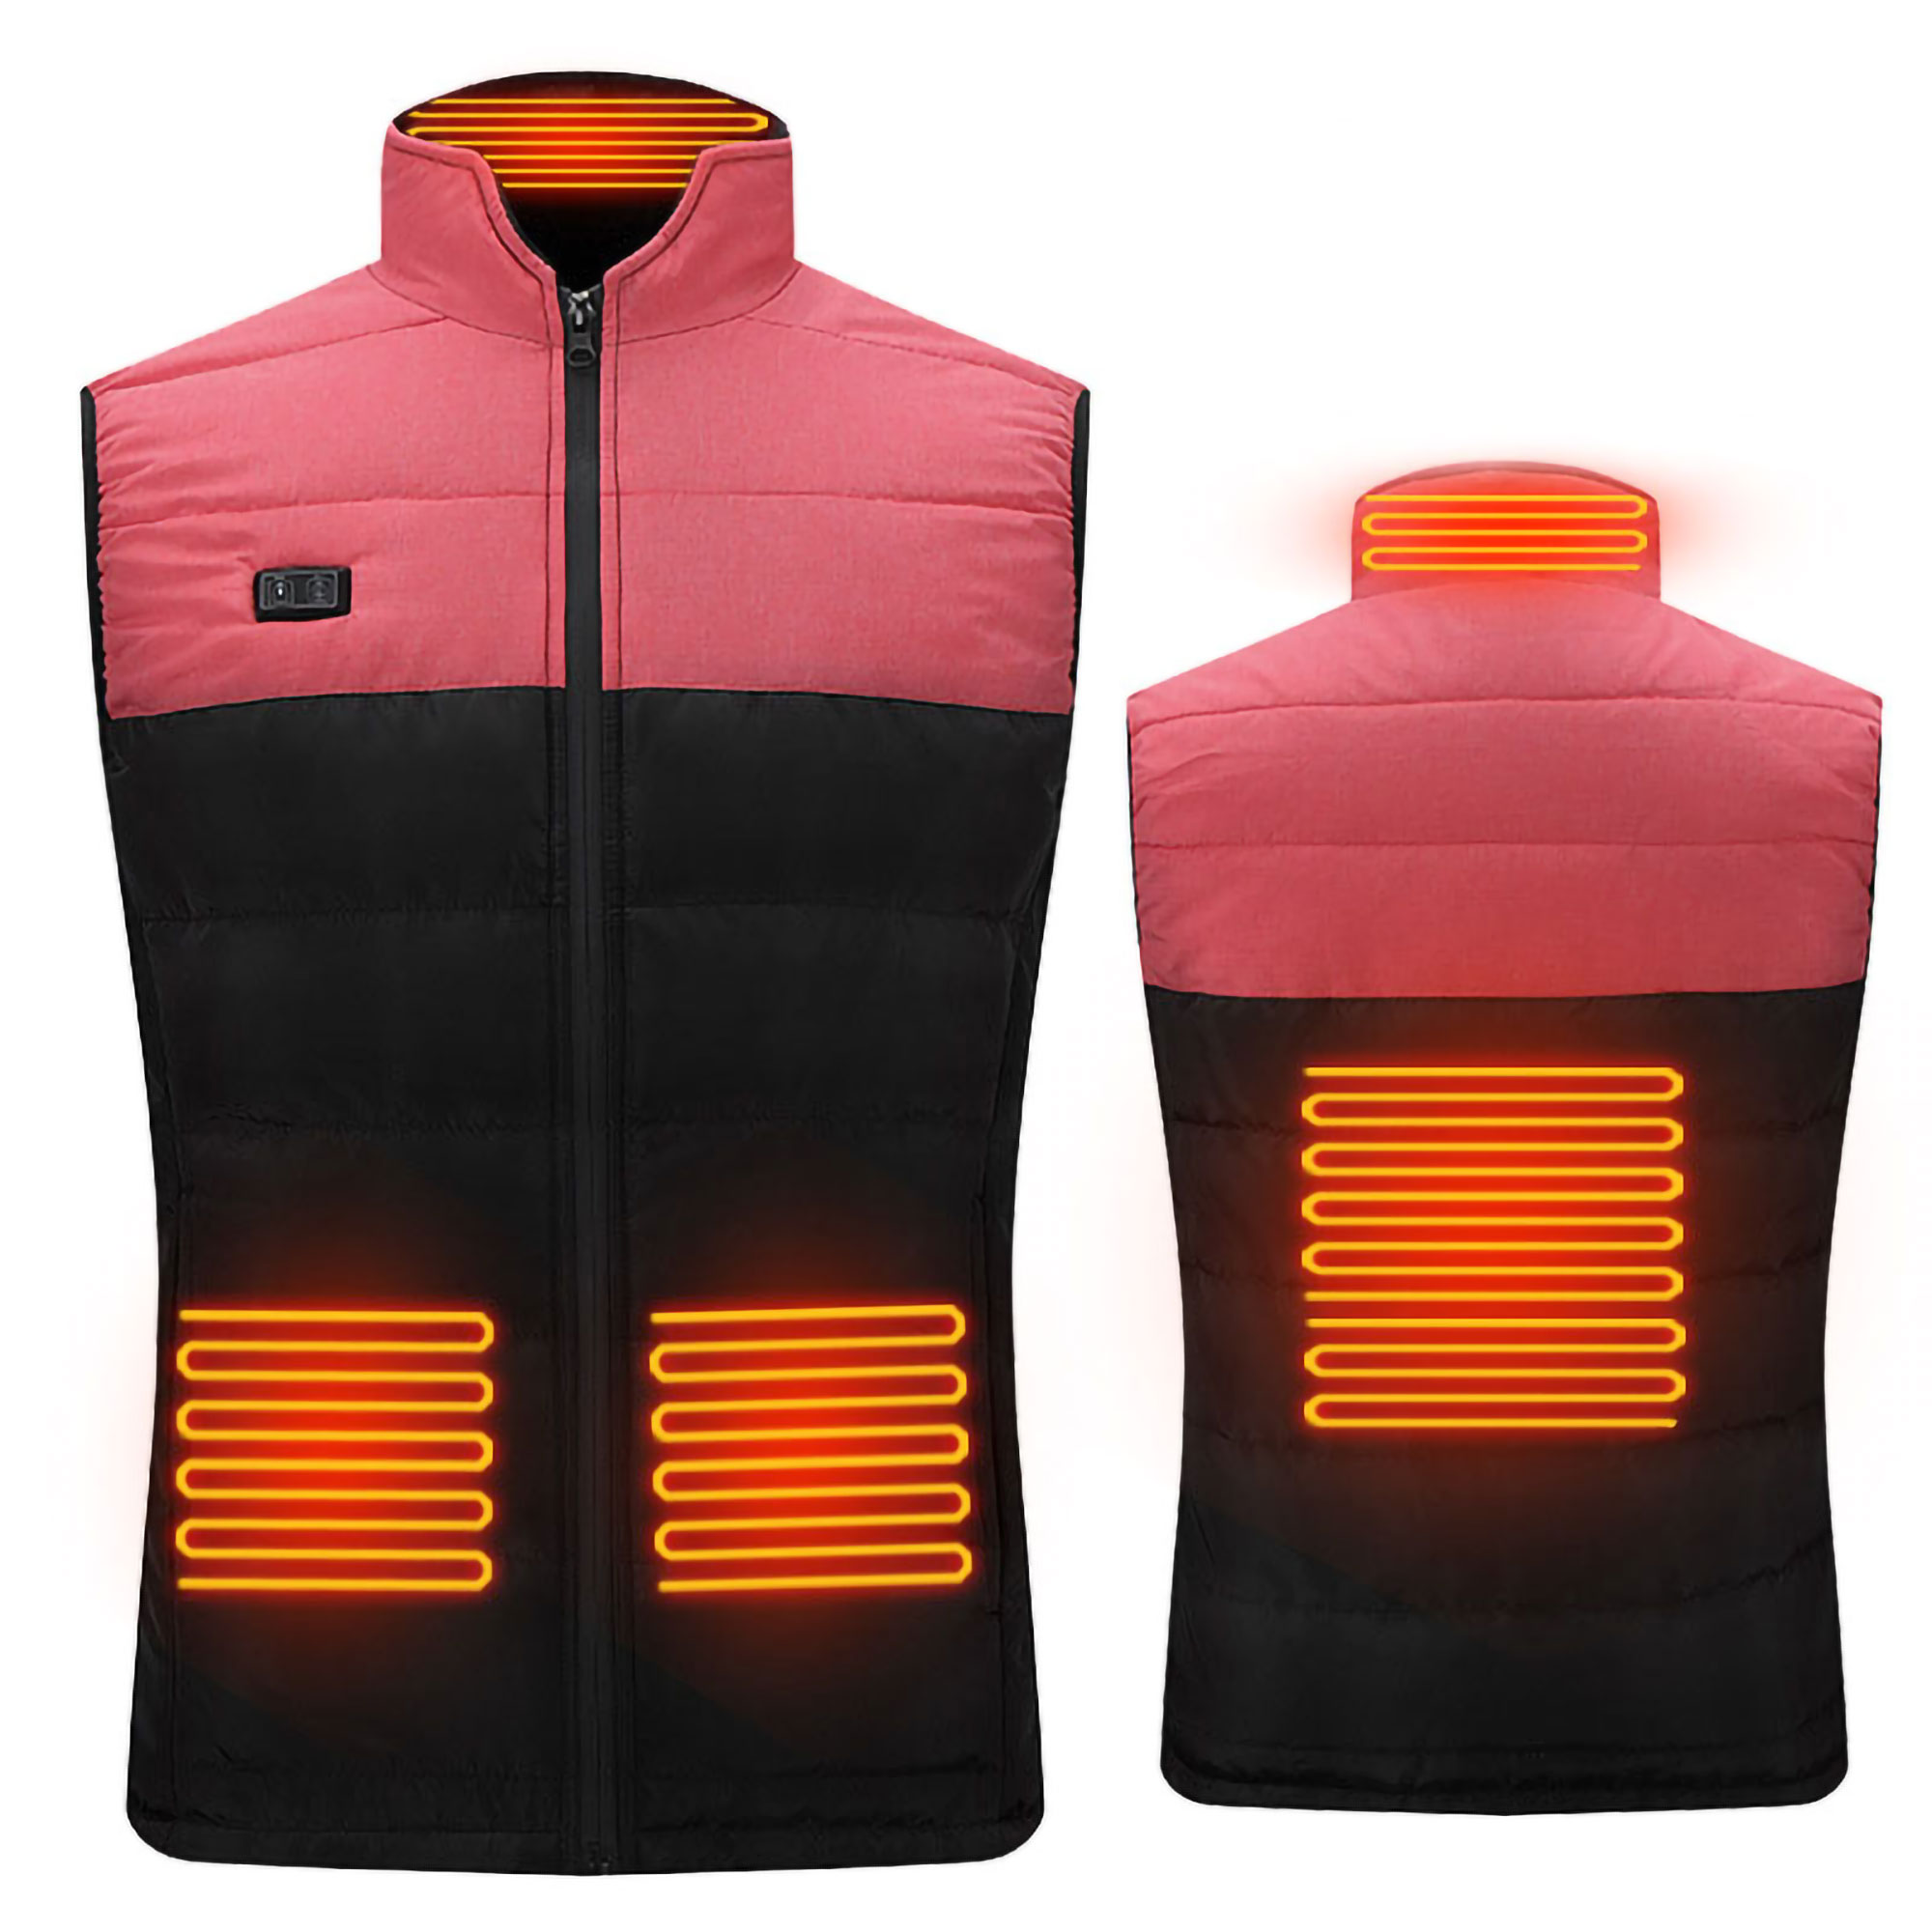 Sexy Dance Electric Heated Vest for Men Women Heating Jacket Sleeveless Zipper Coat Lightweight Thermal Outwear With 10000mHA Power Bank - image 1 of 3